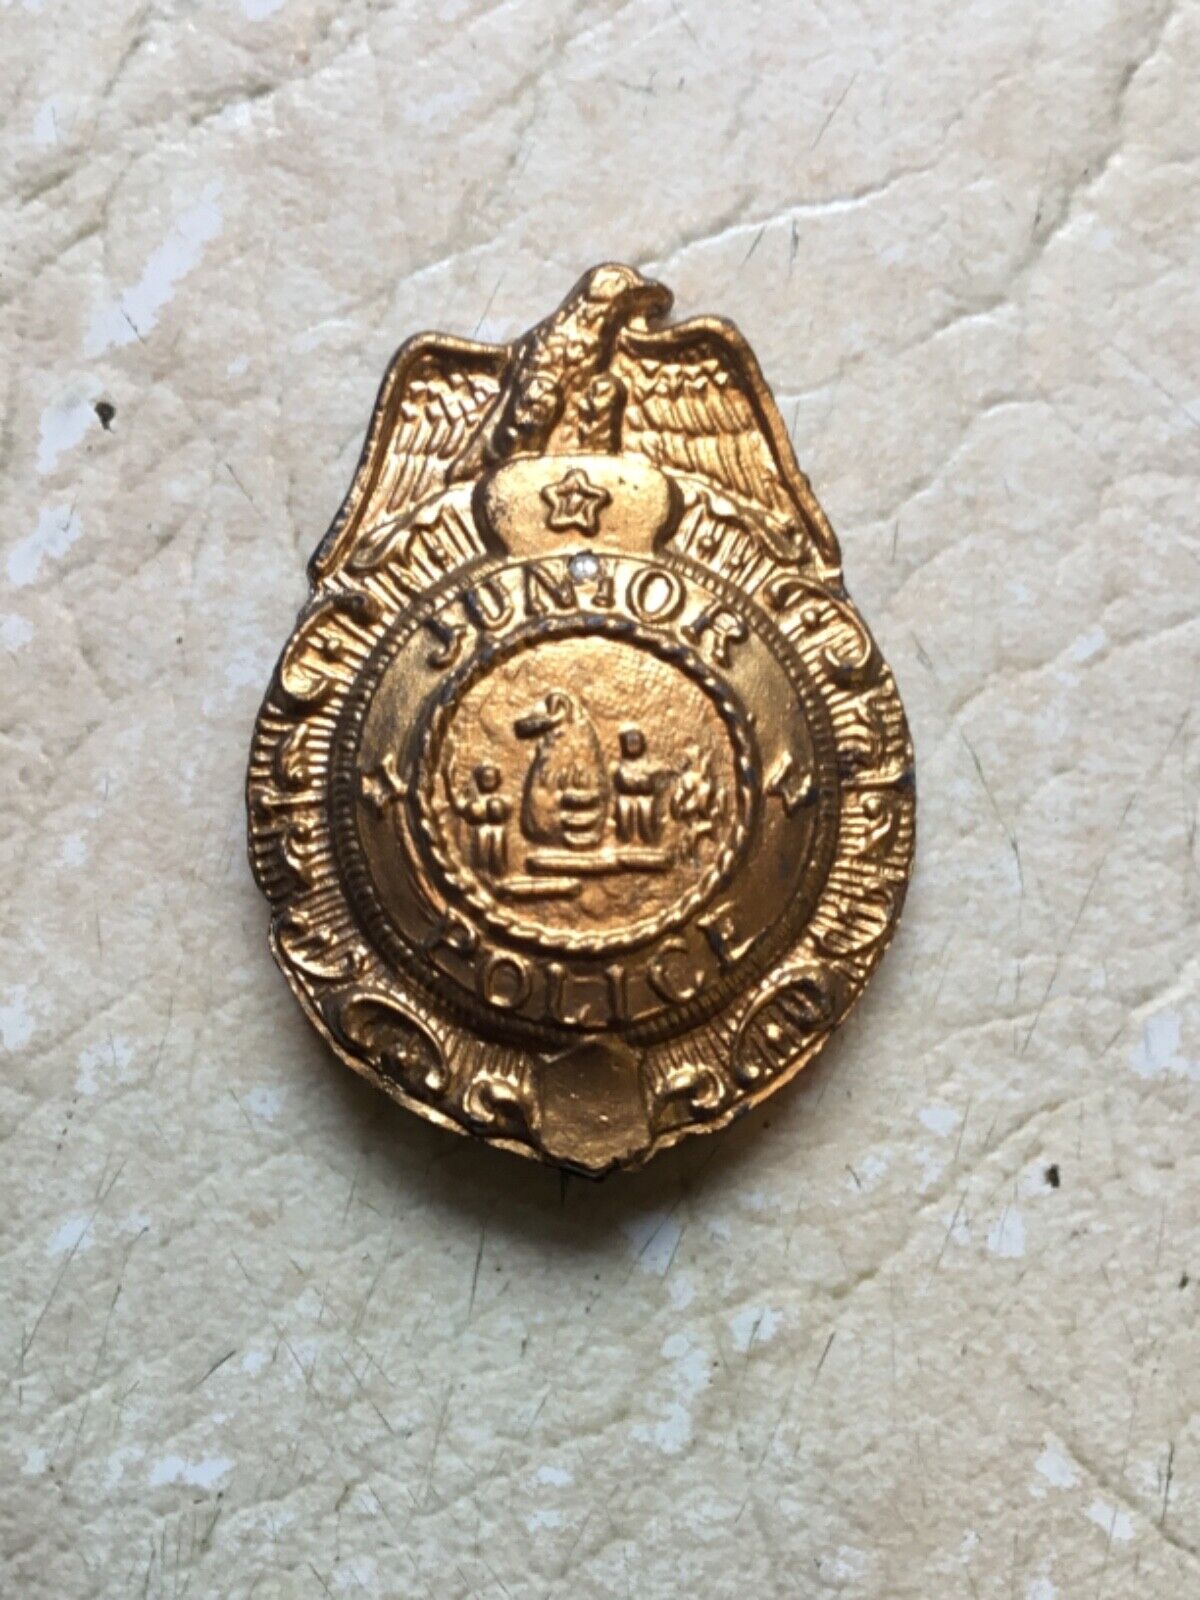 VINTAGE 1950’s GOLD JUNIOR POLICE BADGE DETECTIVE EAGLE METAL WITH PIN